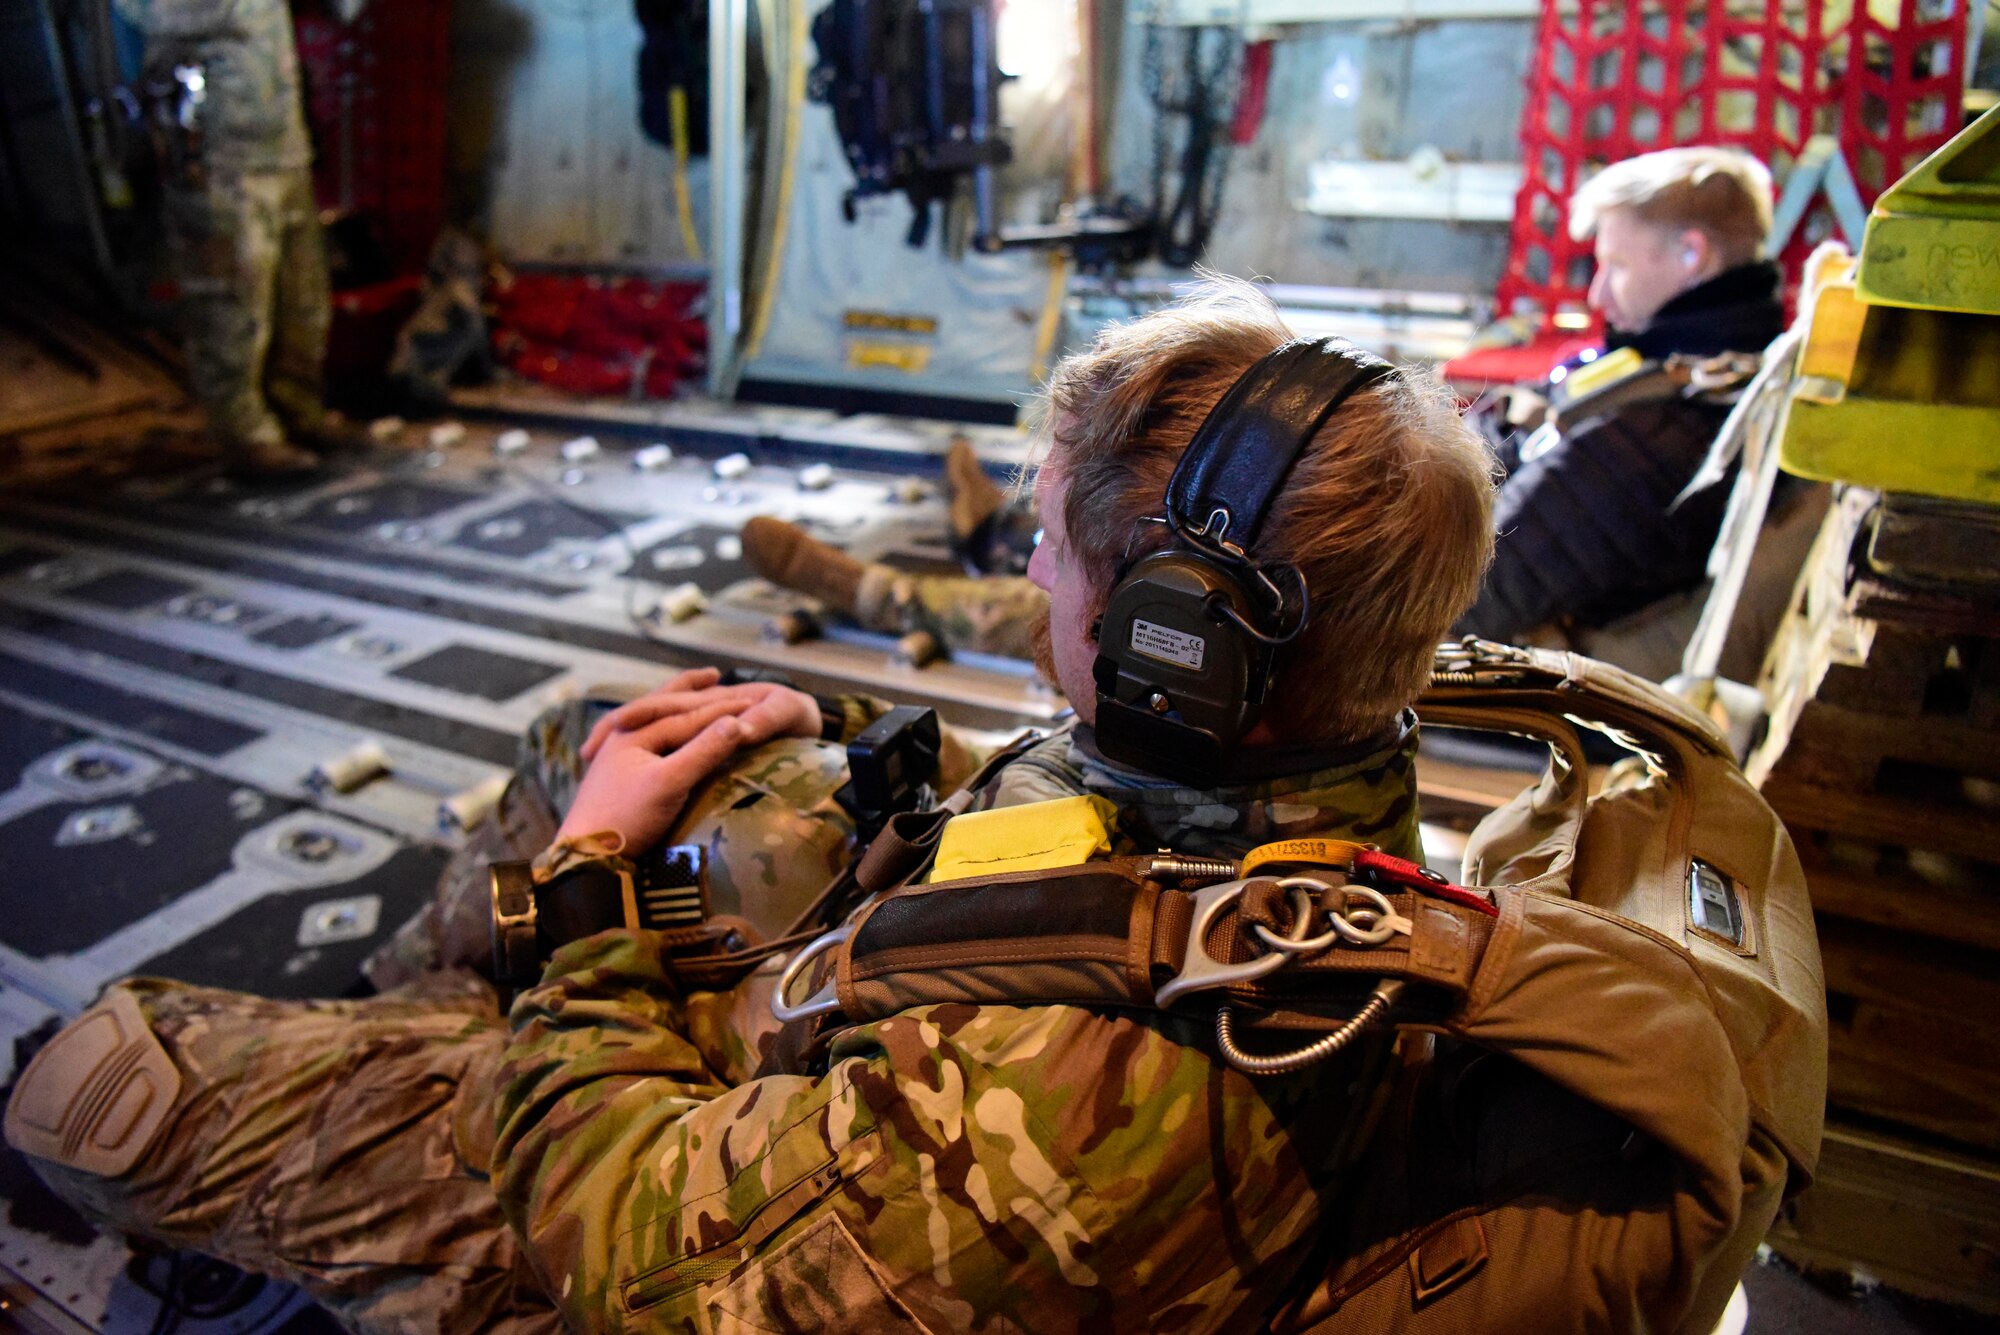 Airman and Soldier seated in C-130J Super Hercules